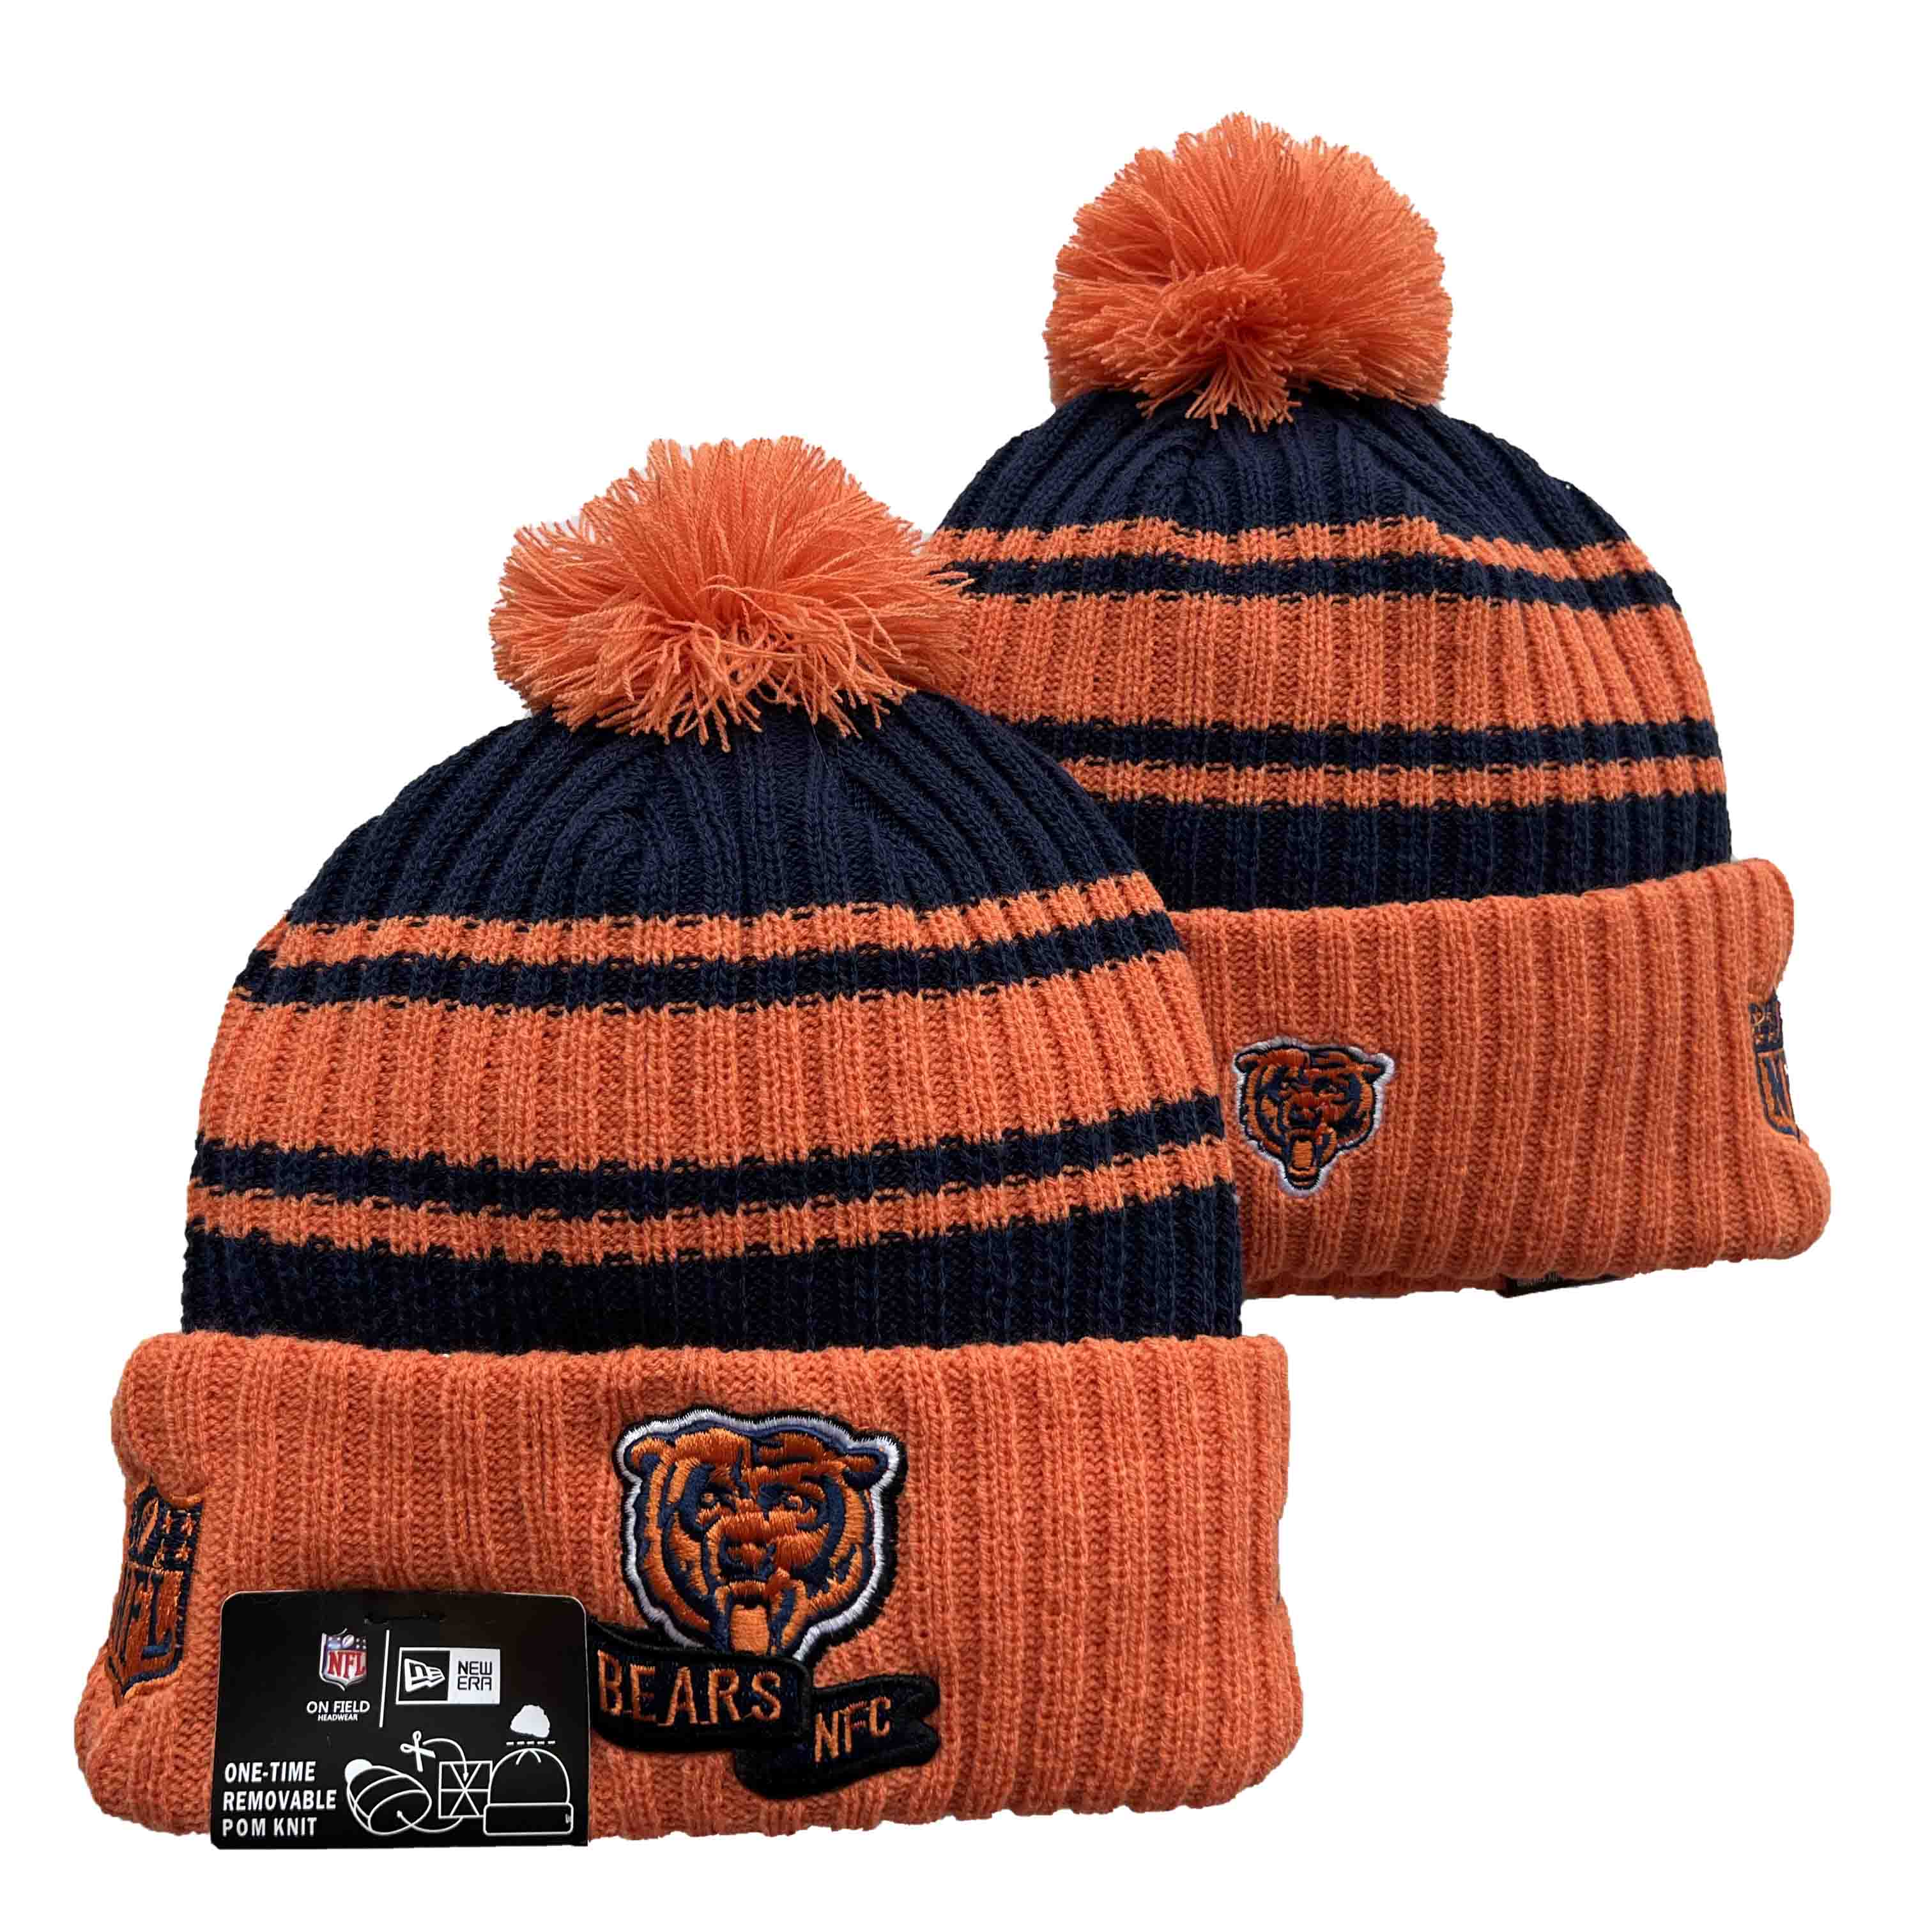 NFL Chicago Bears Beanies Knit Hats-YD892